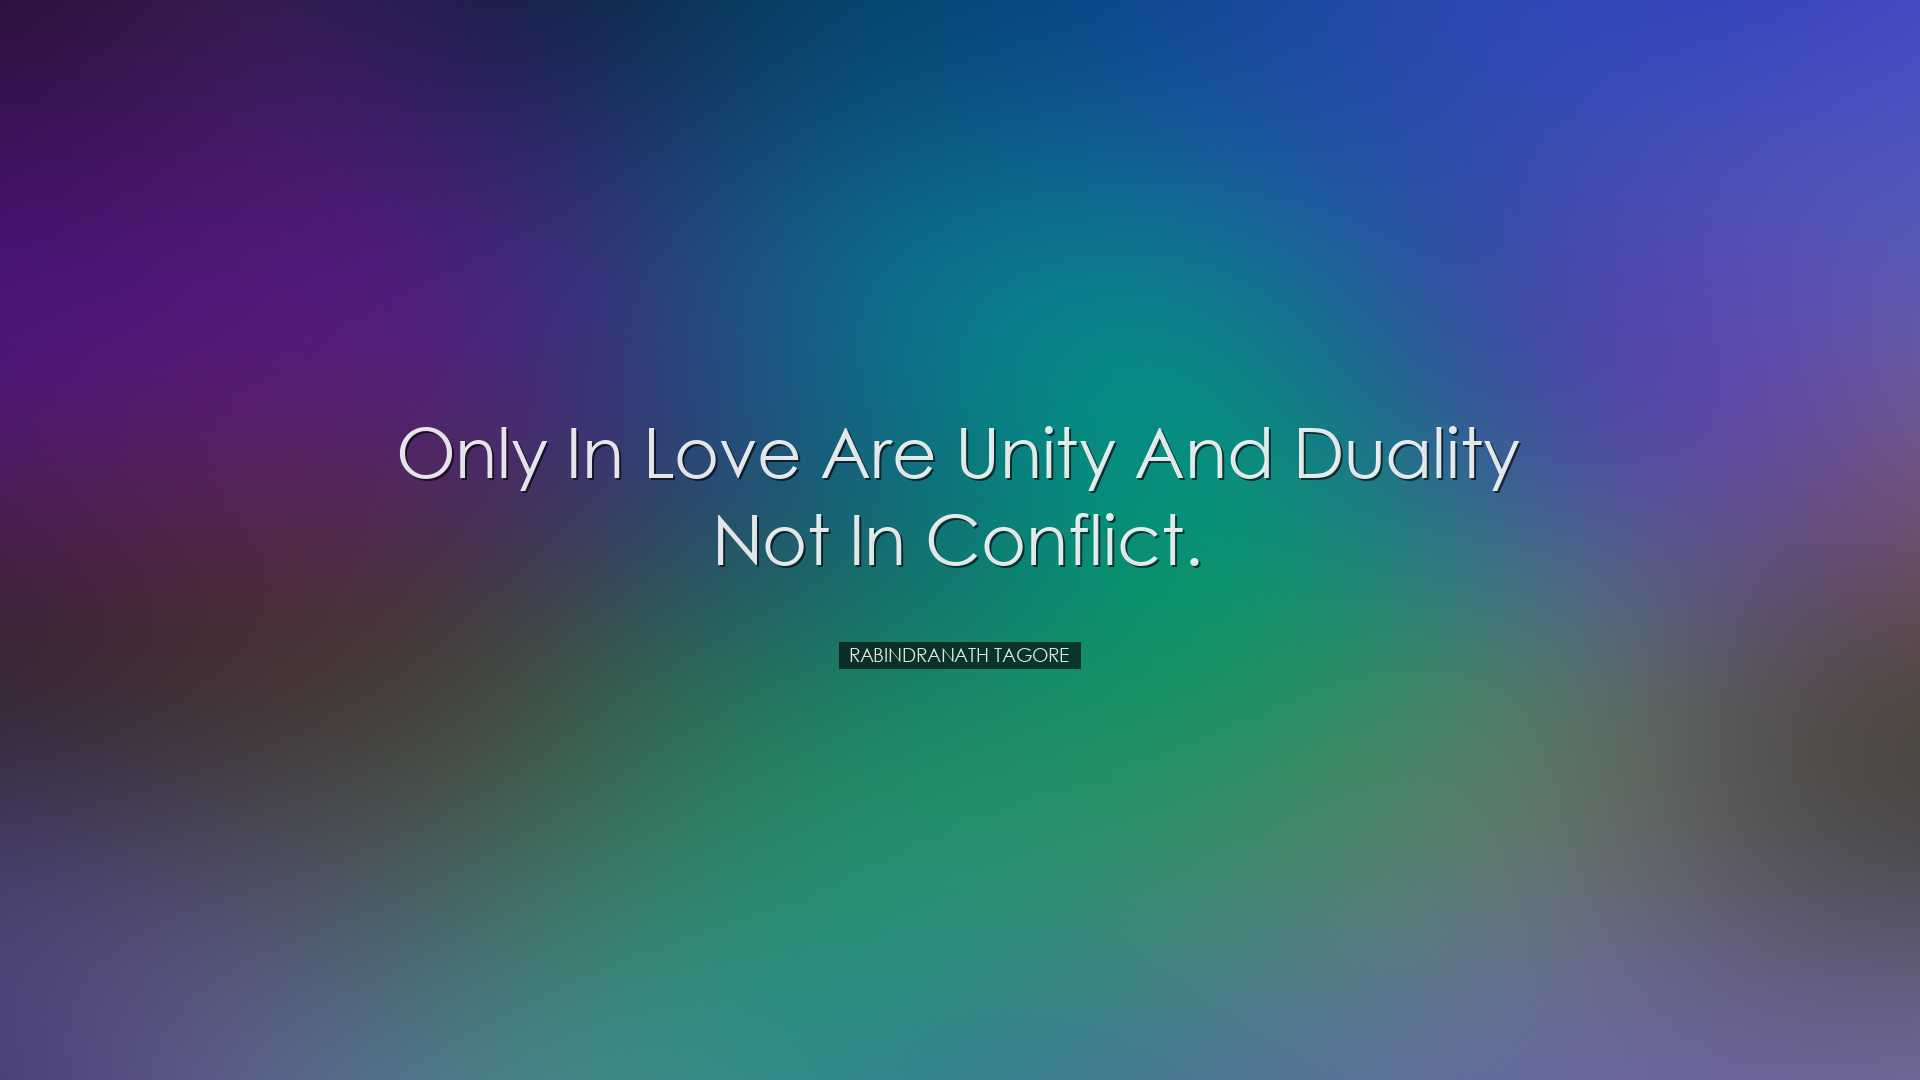 Only in love are unity and duality not in conflict. - Rabindranath